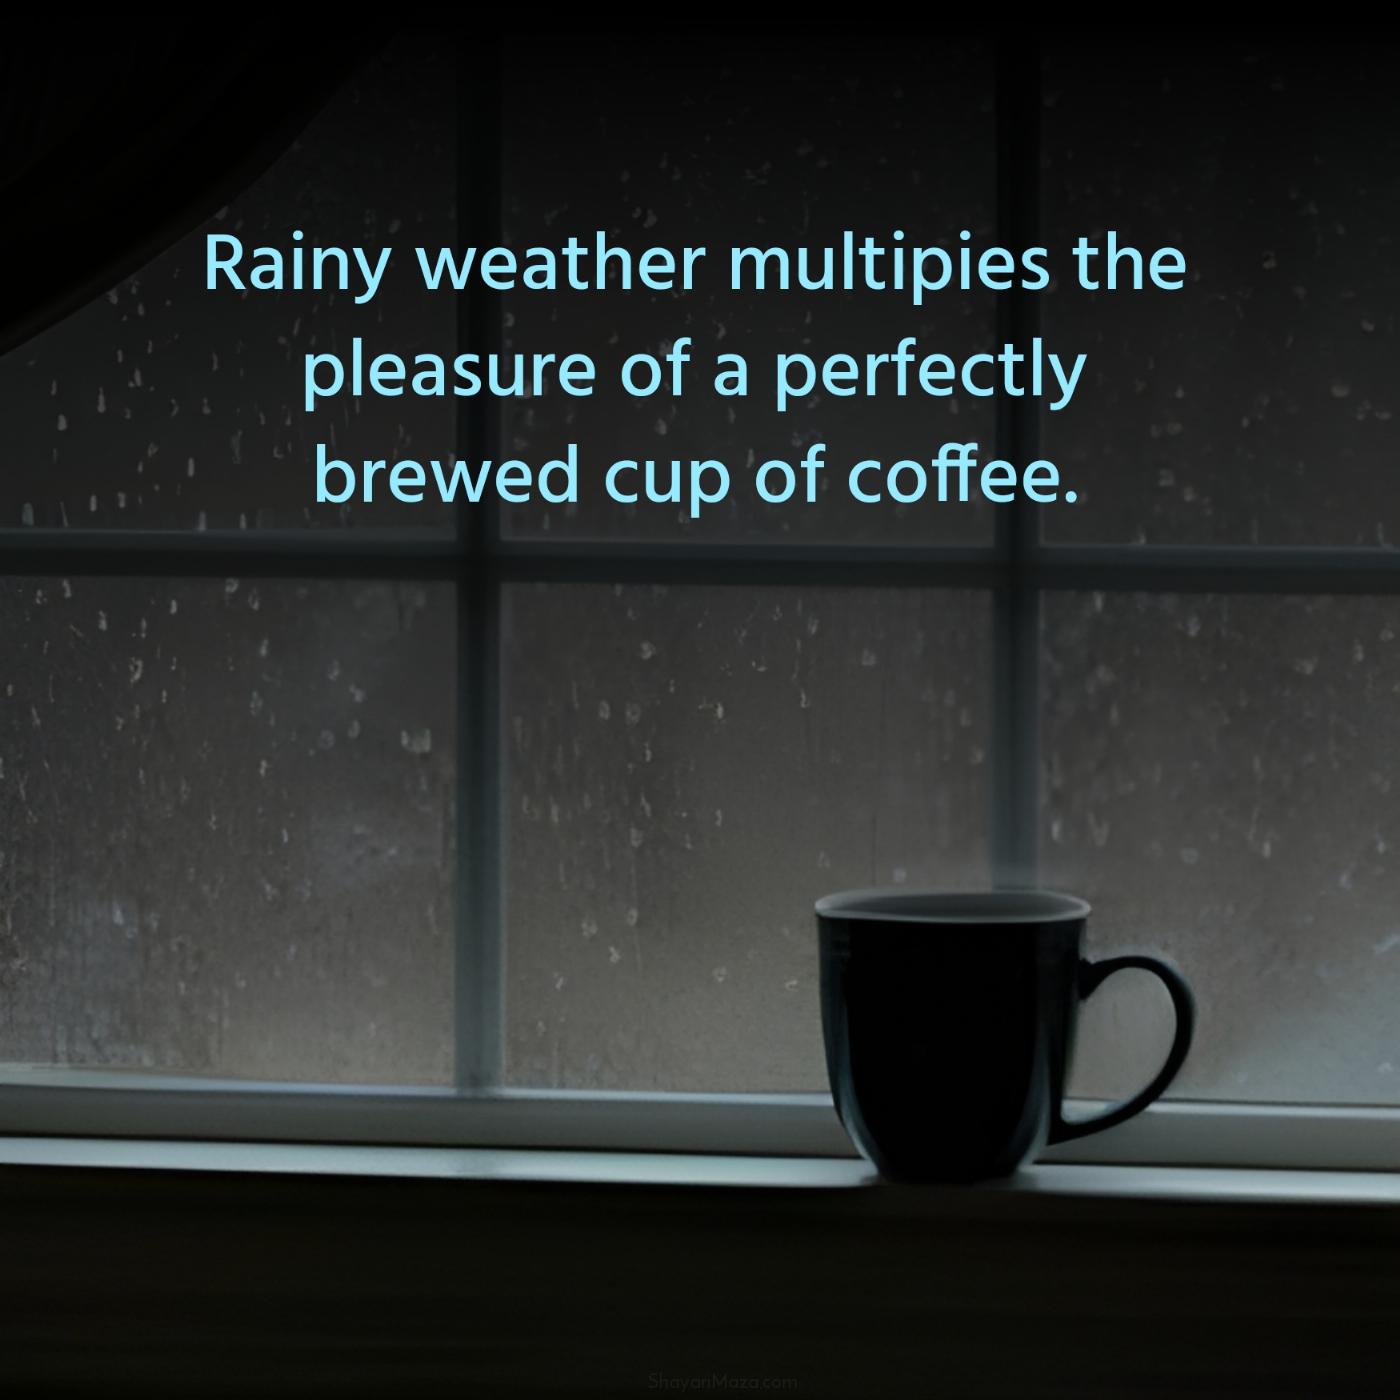 Rainy weather multipies the pleasure of a perfectly brewed cup of coffee